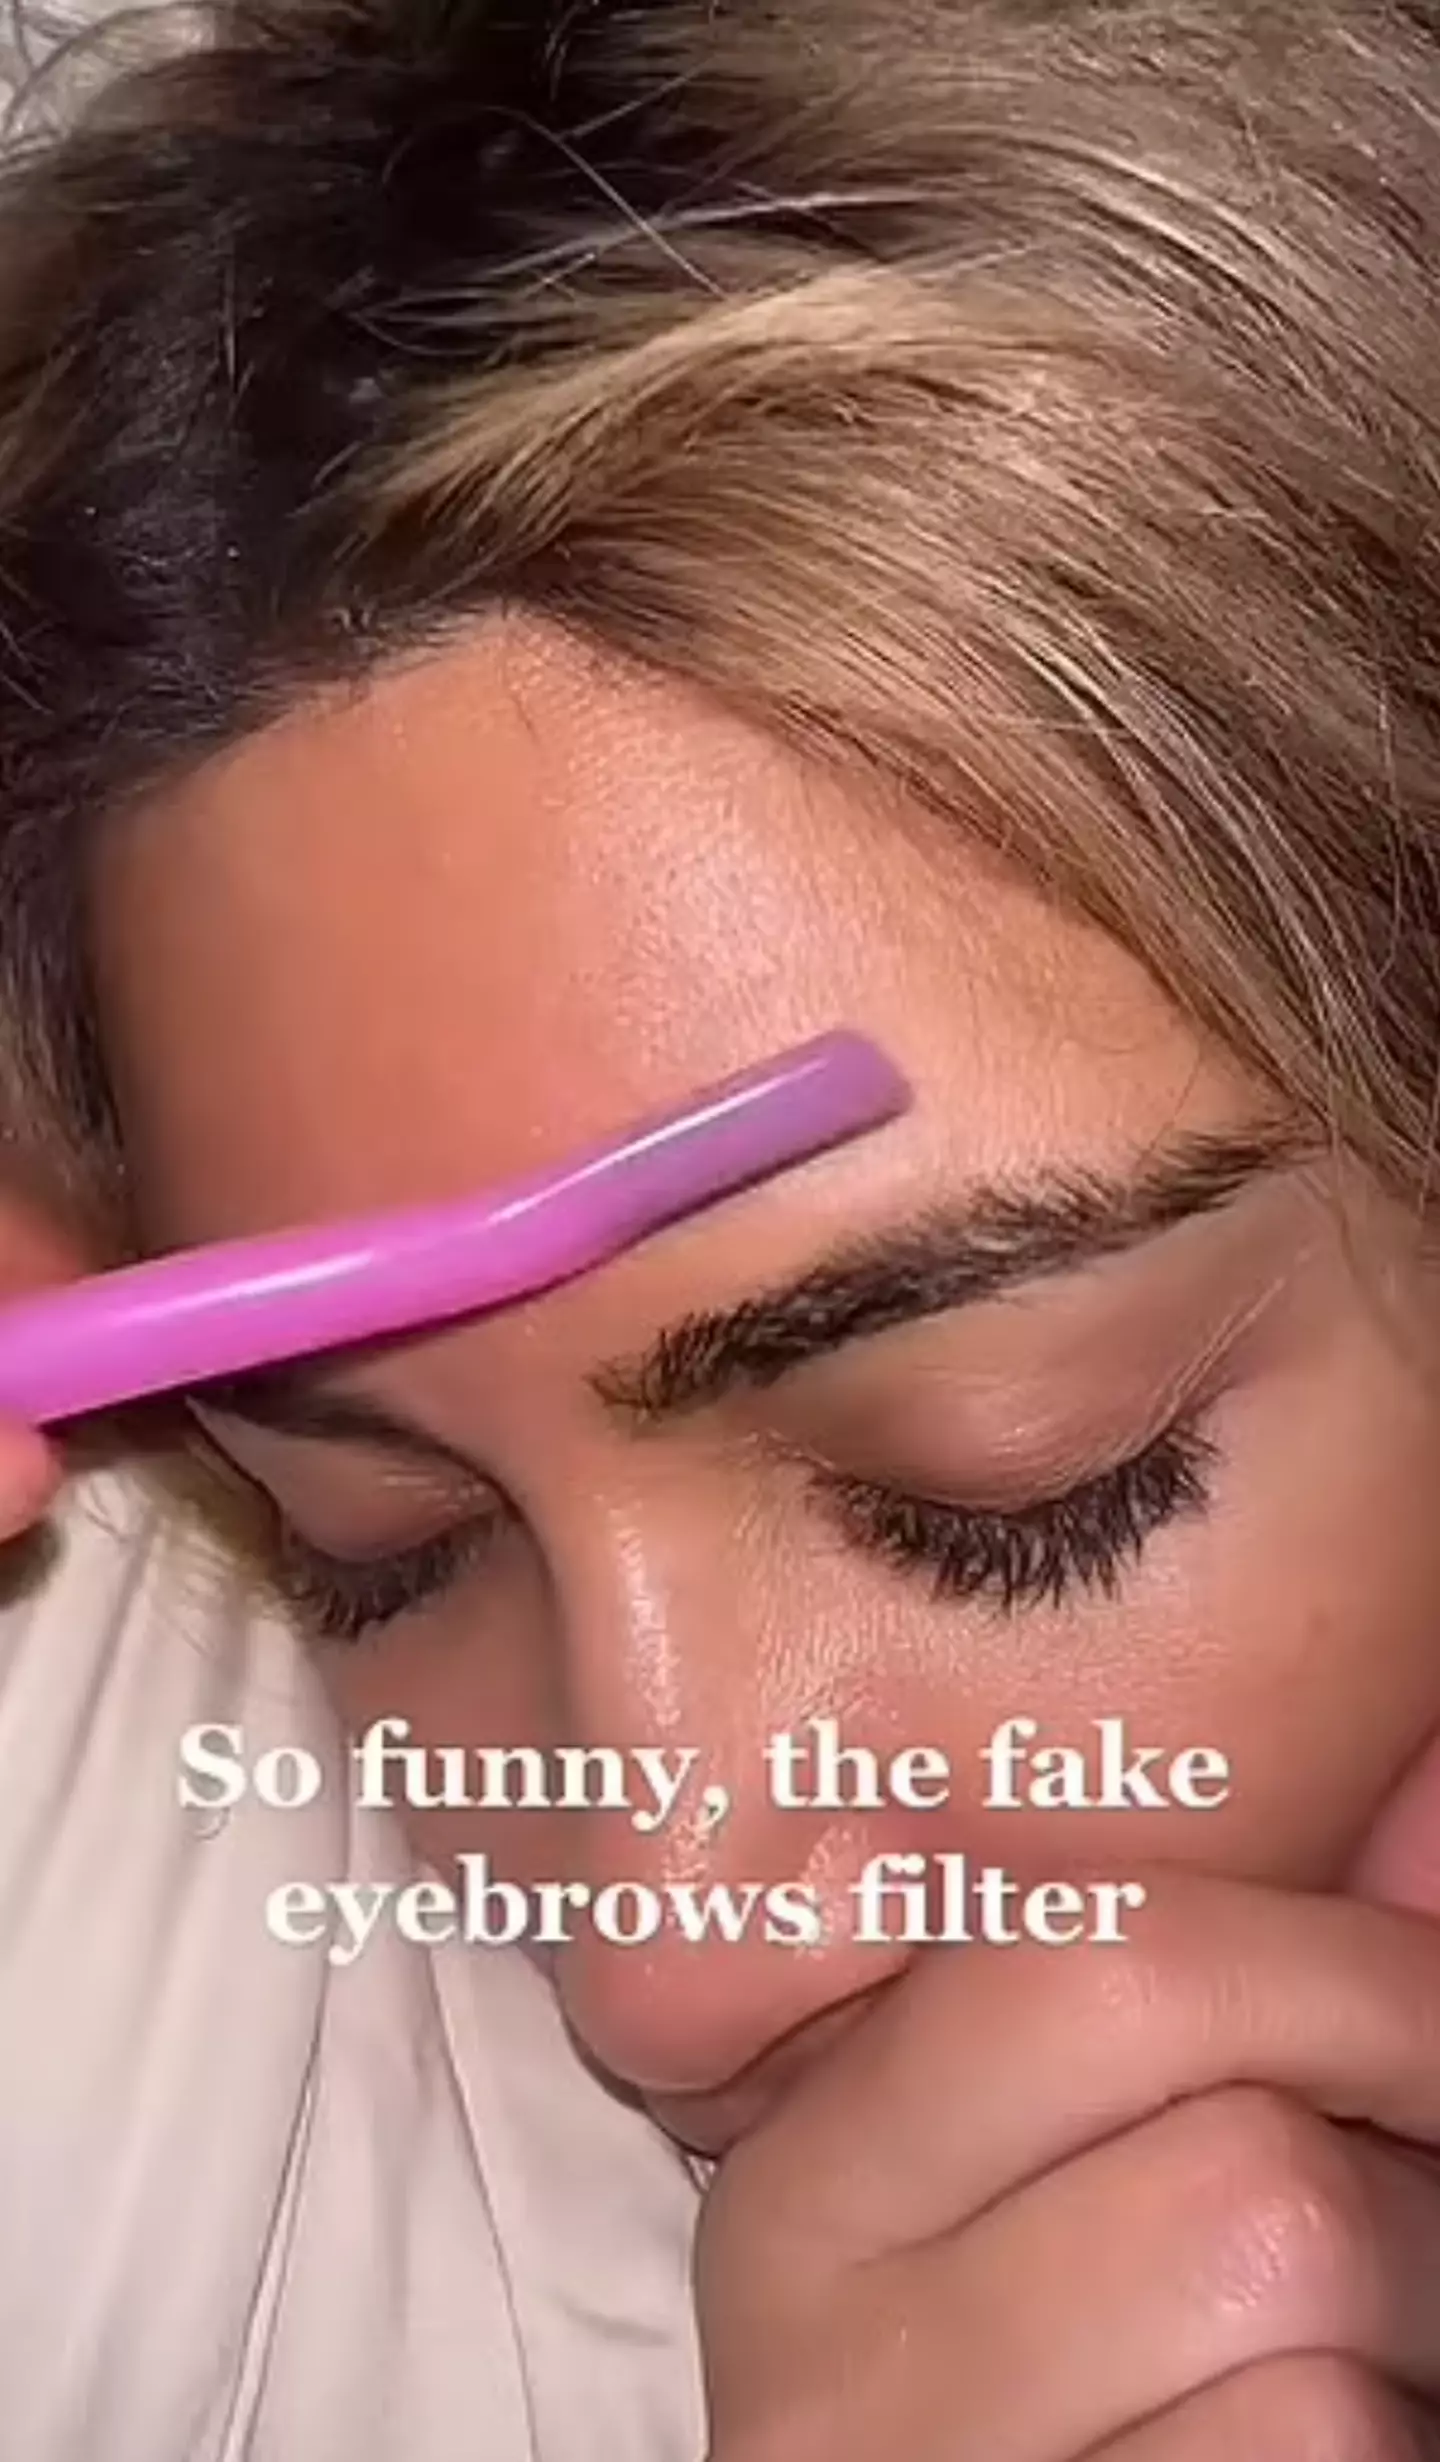 North pretended to use a razor on her mum's eyebrows.